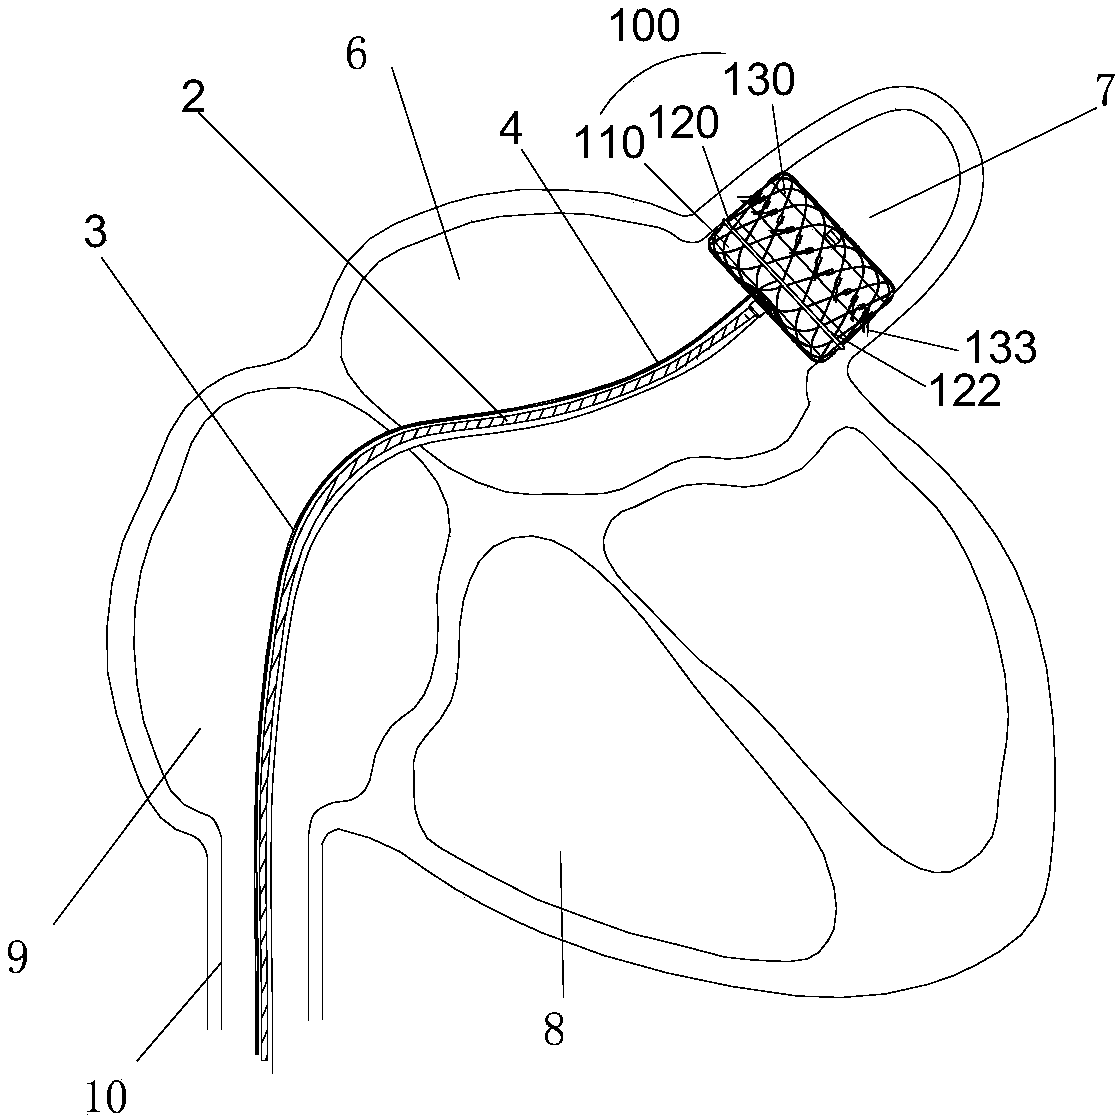 Left atrial appendage occlusion and ablation device